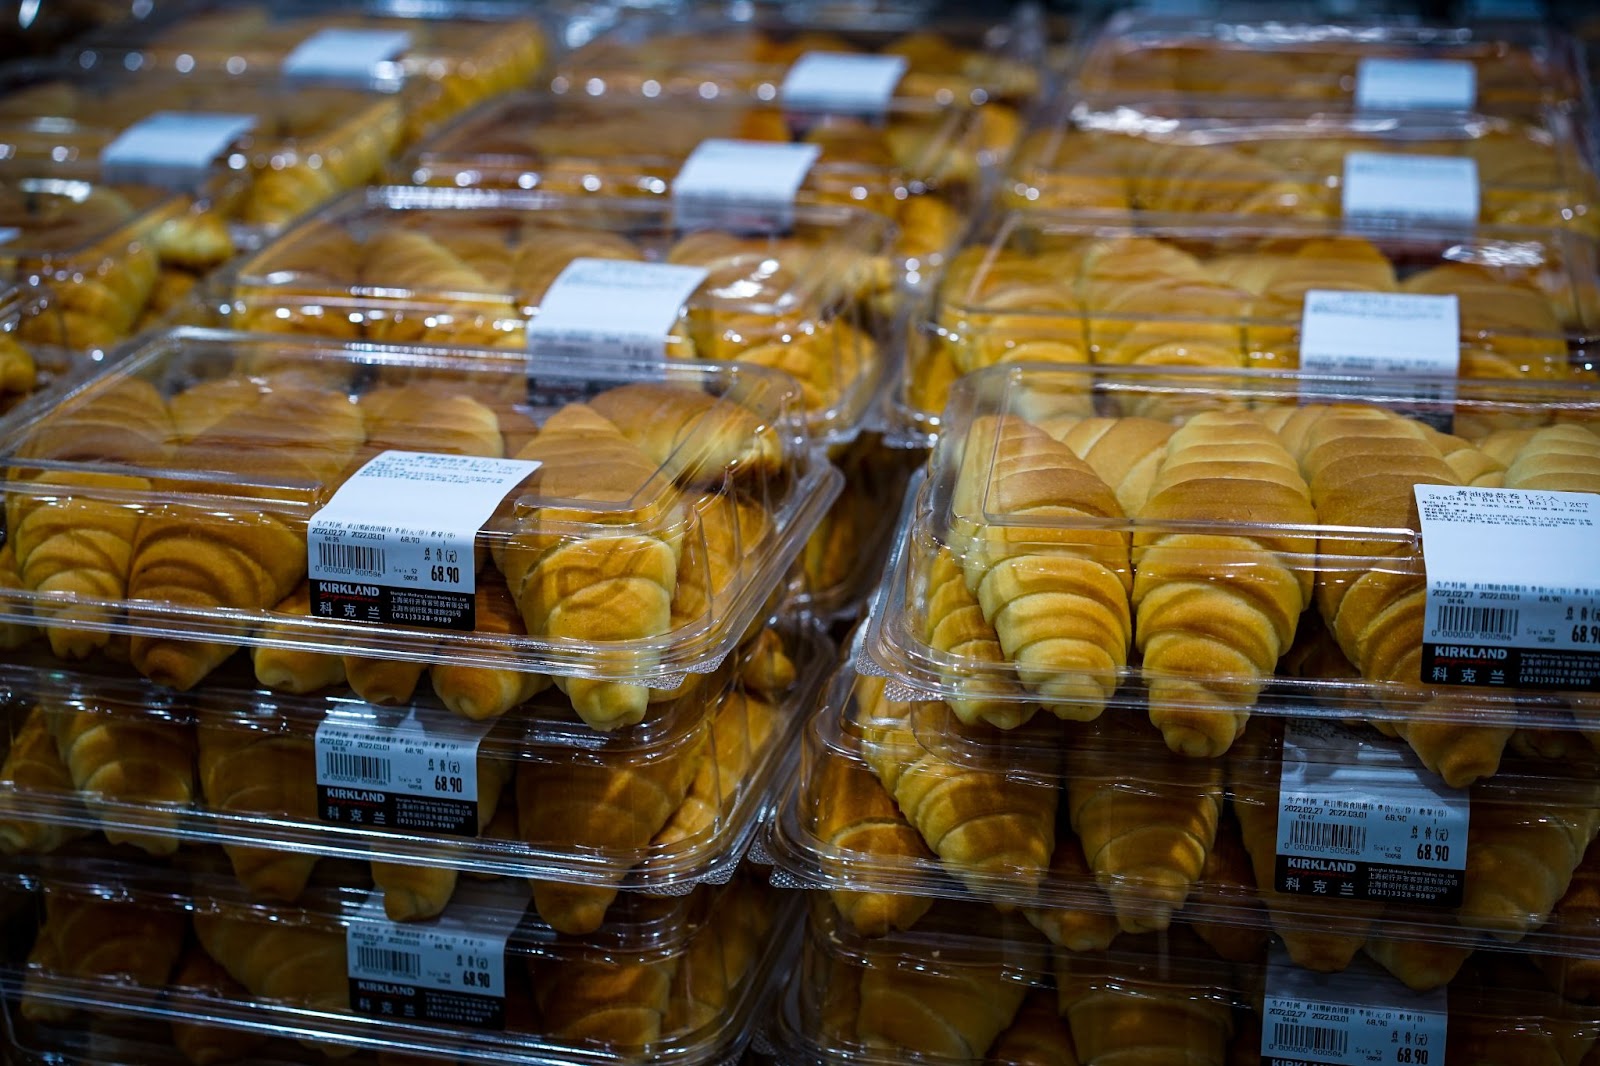 packages of croissants stacked up at the grocery store